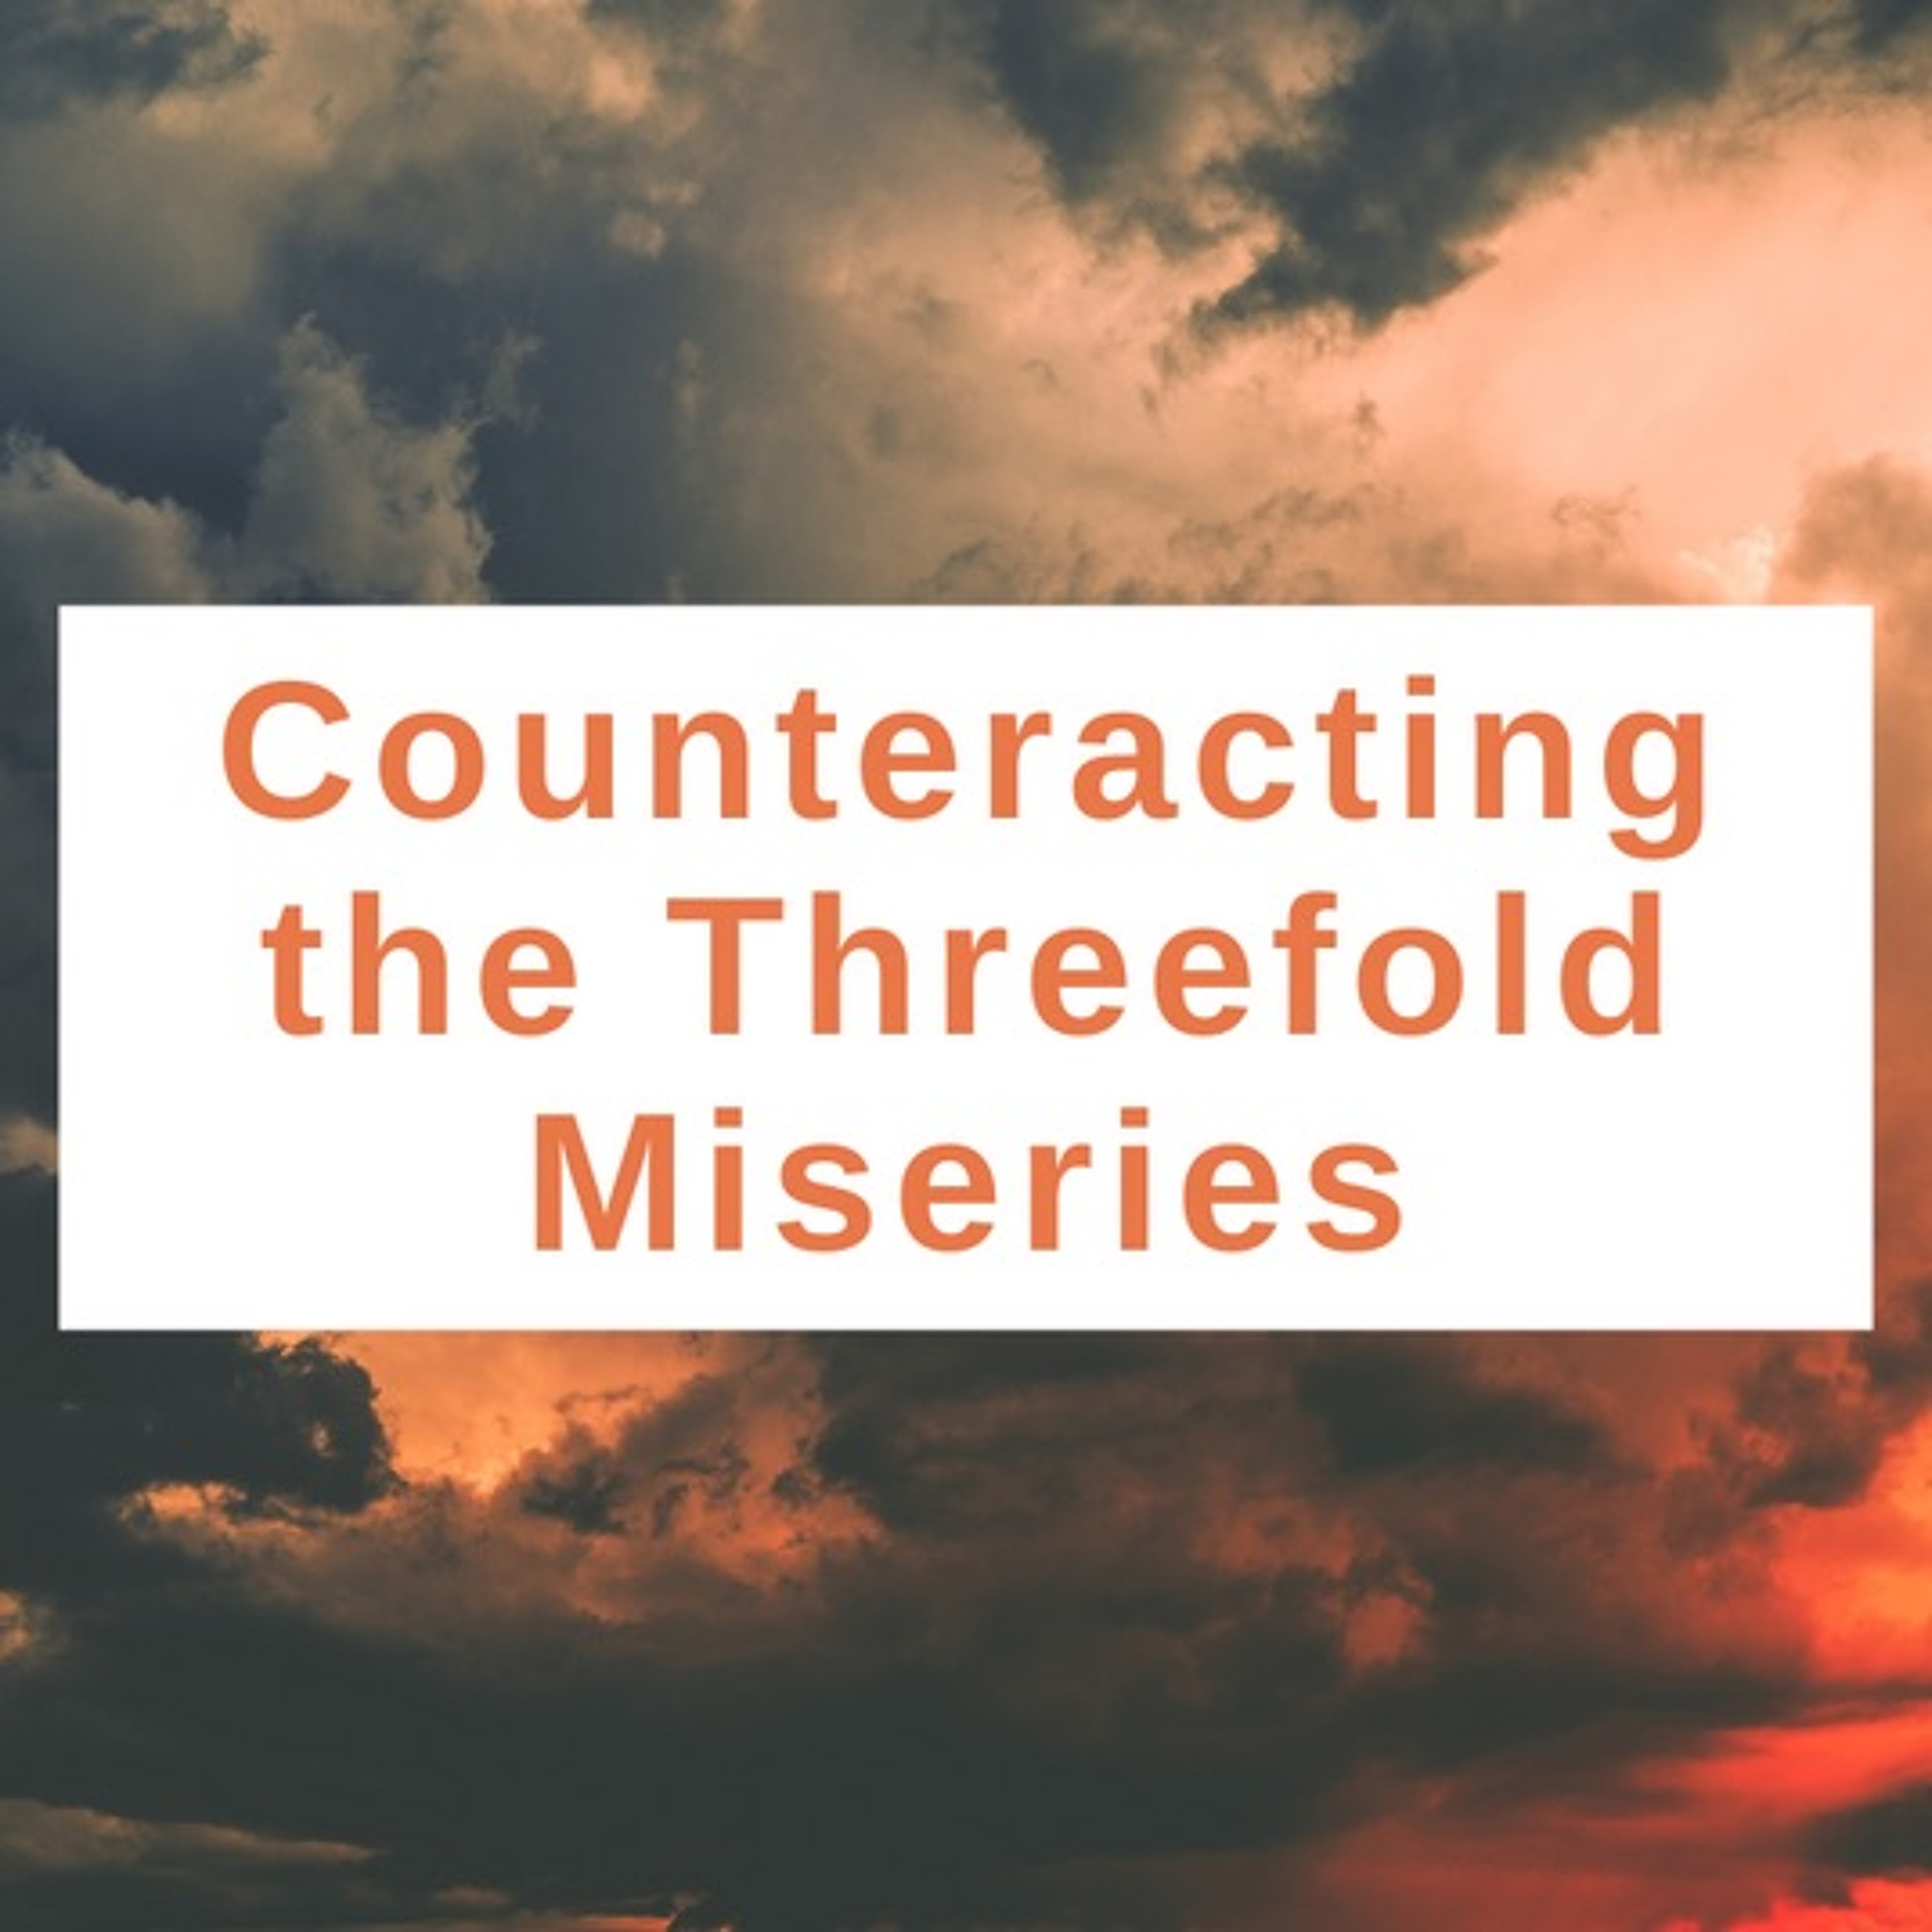 Counteracting the Threefold Miseries